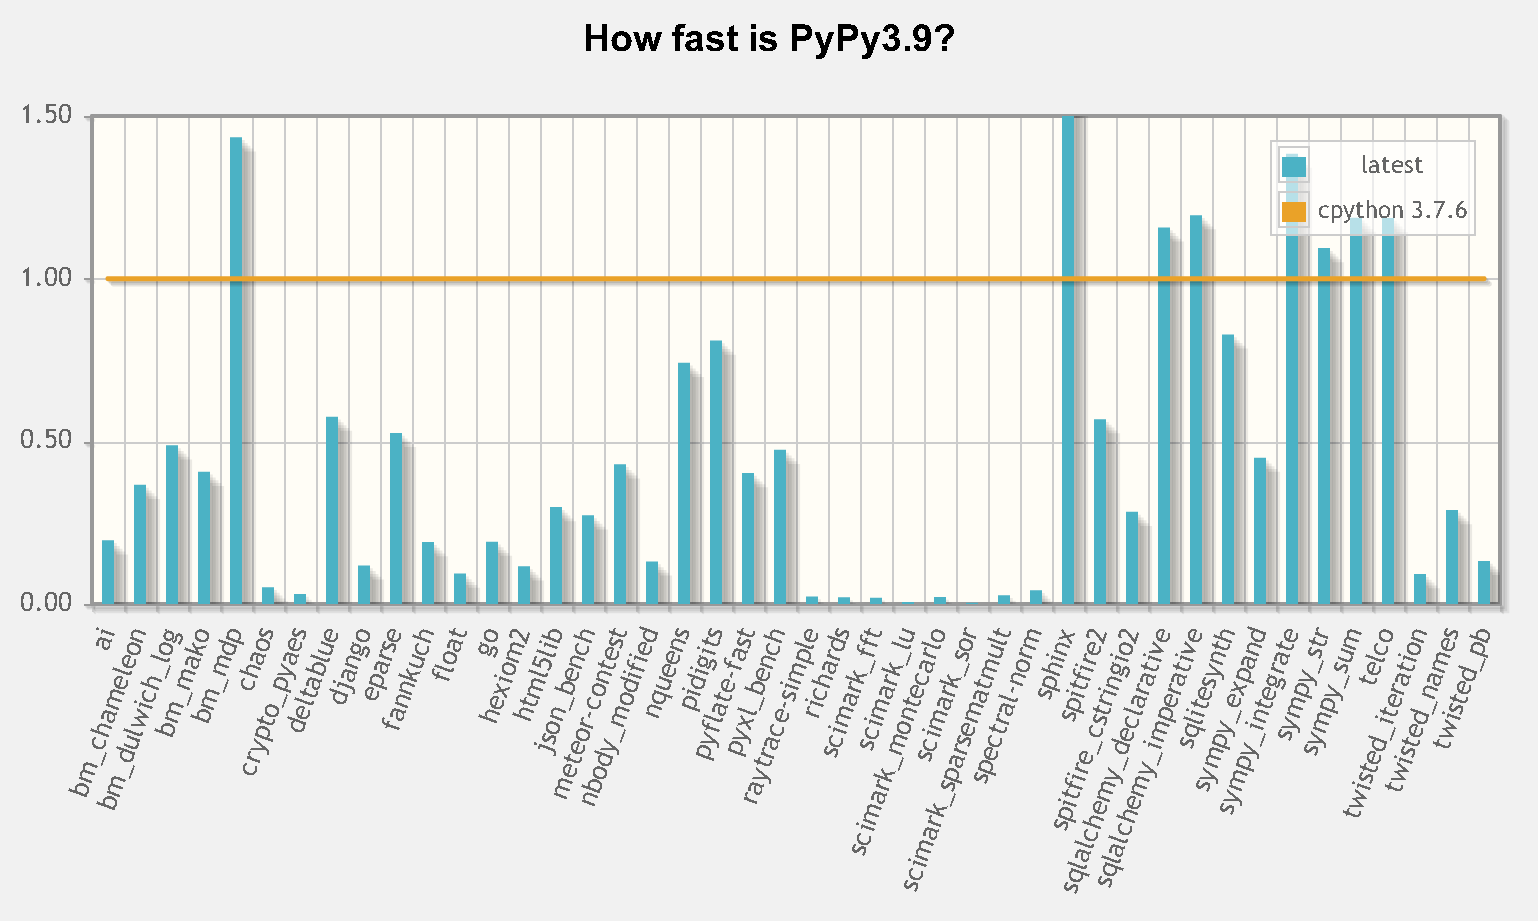 On average, PyPy is 4.8 times faster than CPython 3.7.